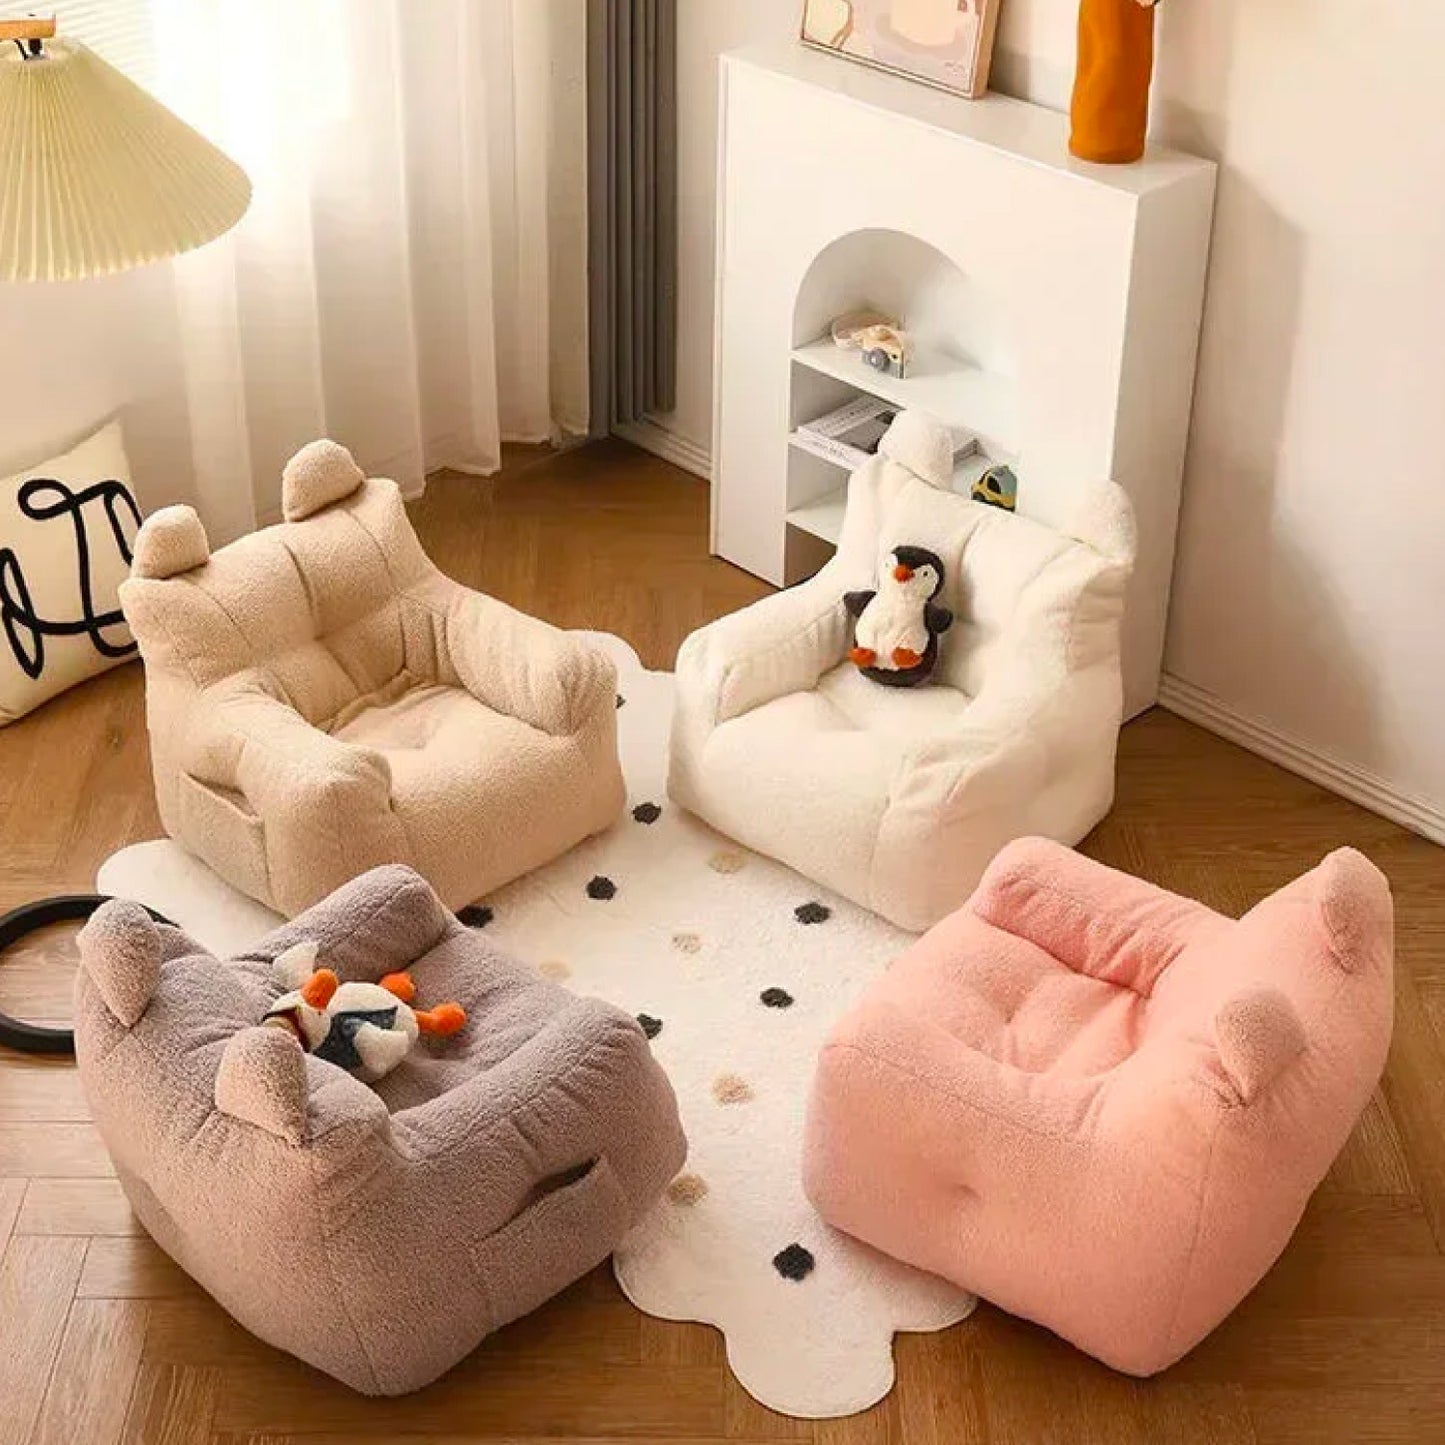 Adorable Cozy Kids Sofa with a charming cartoon design, perfect for toddlers and young children.